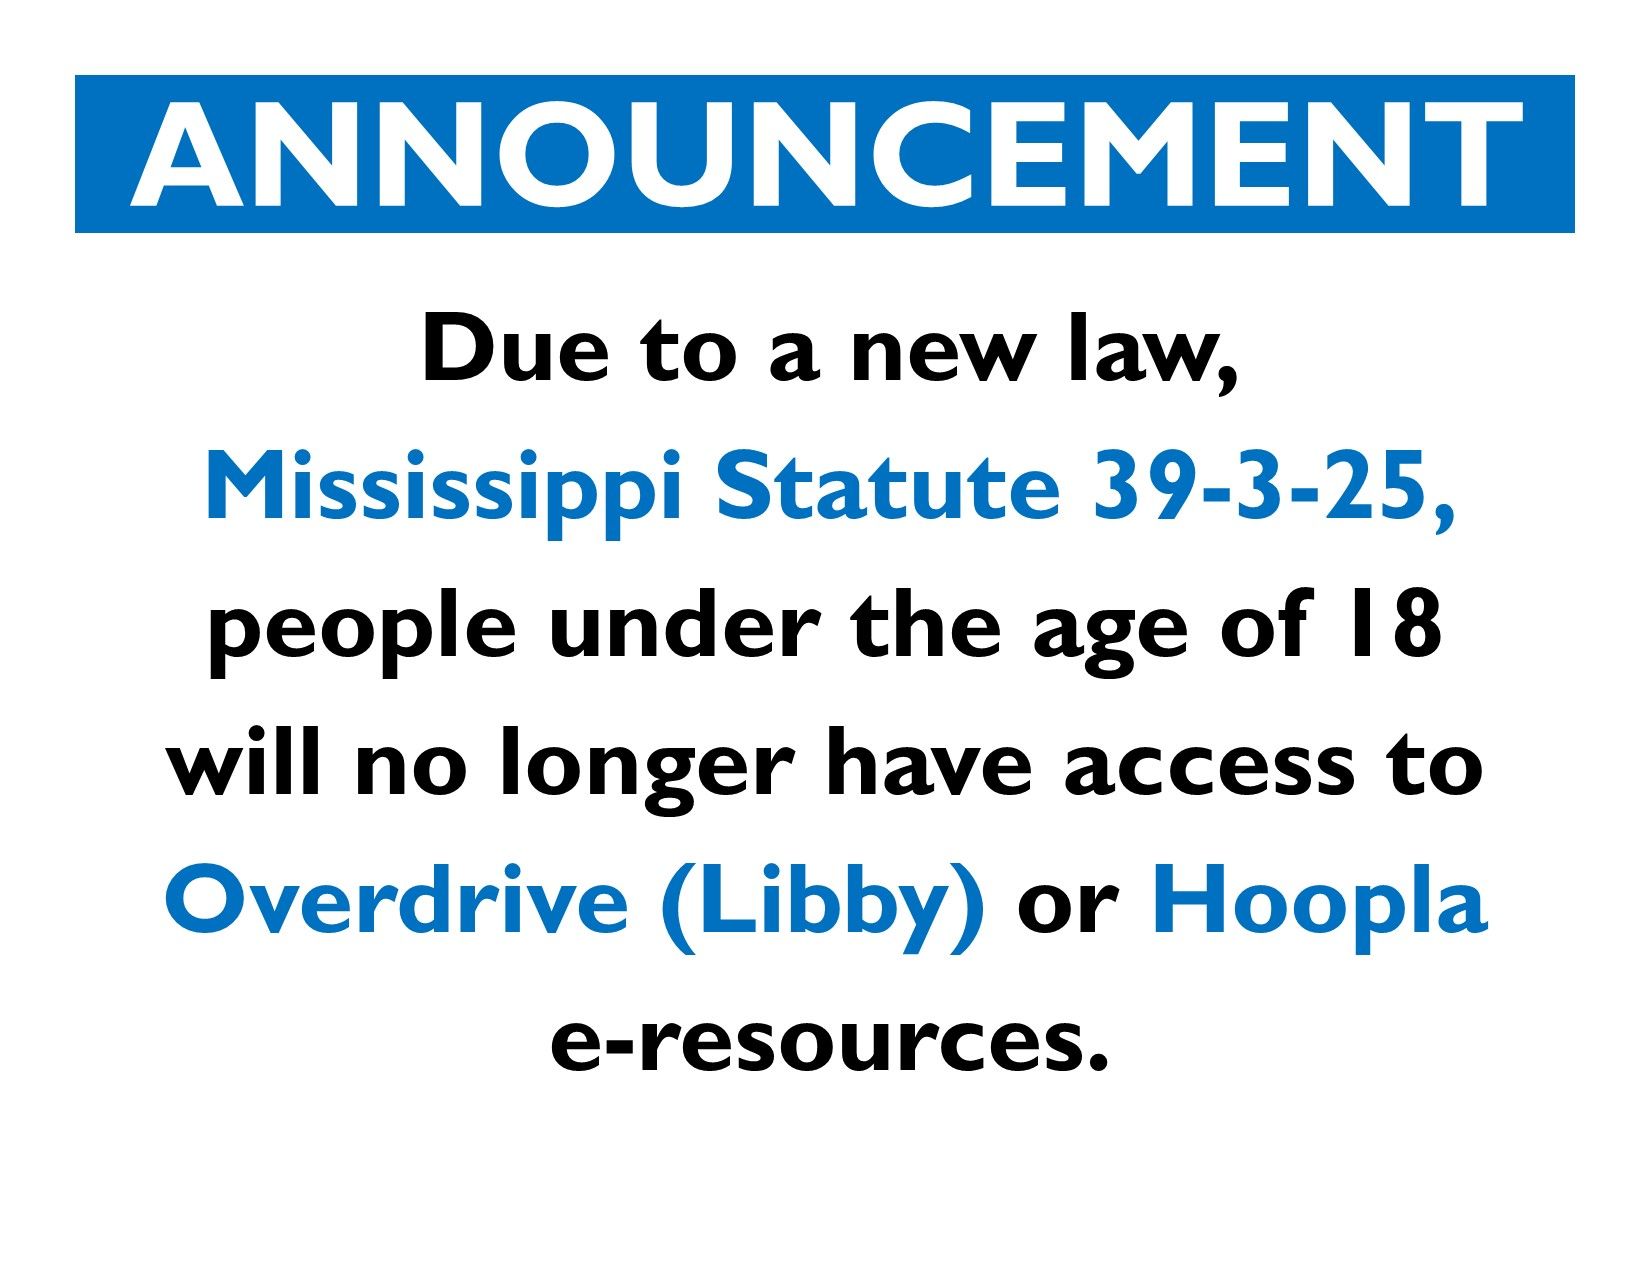 Image of new law announcement from 